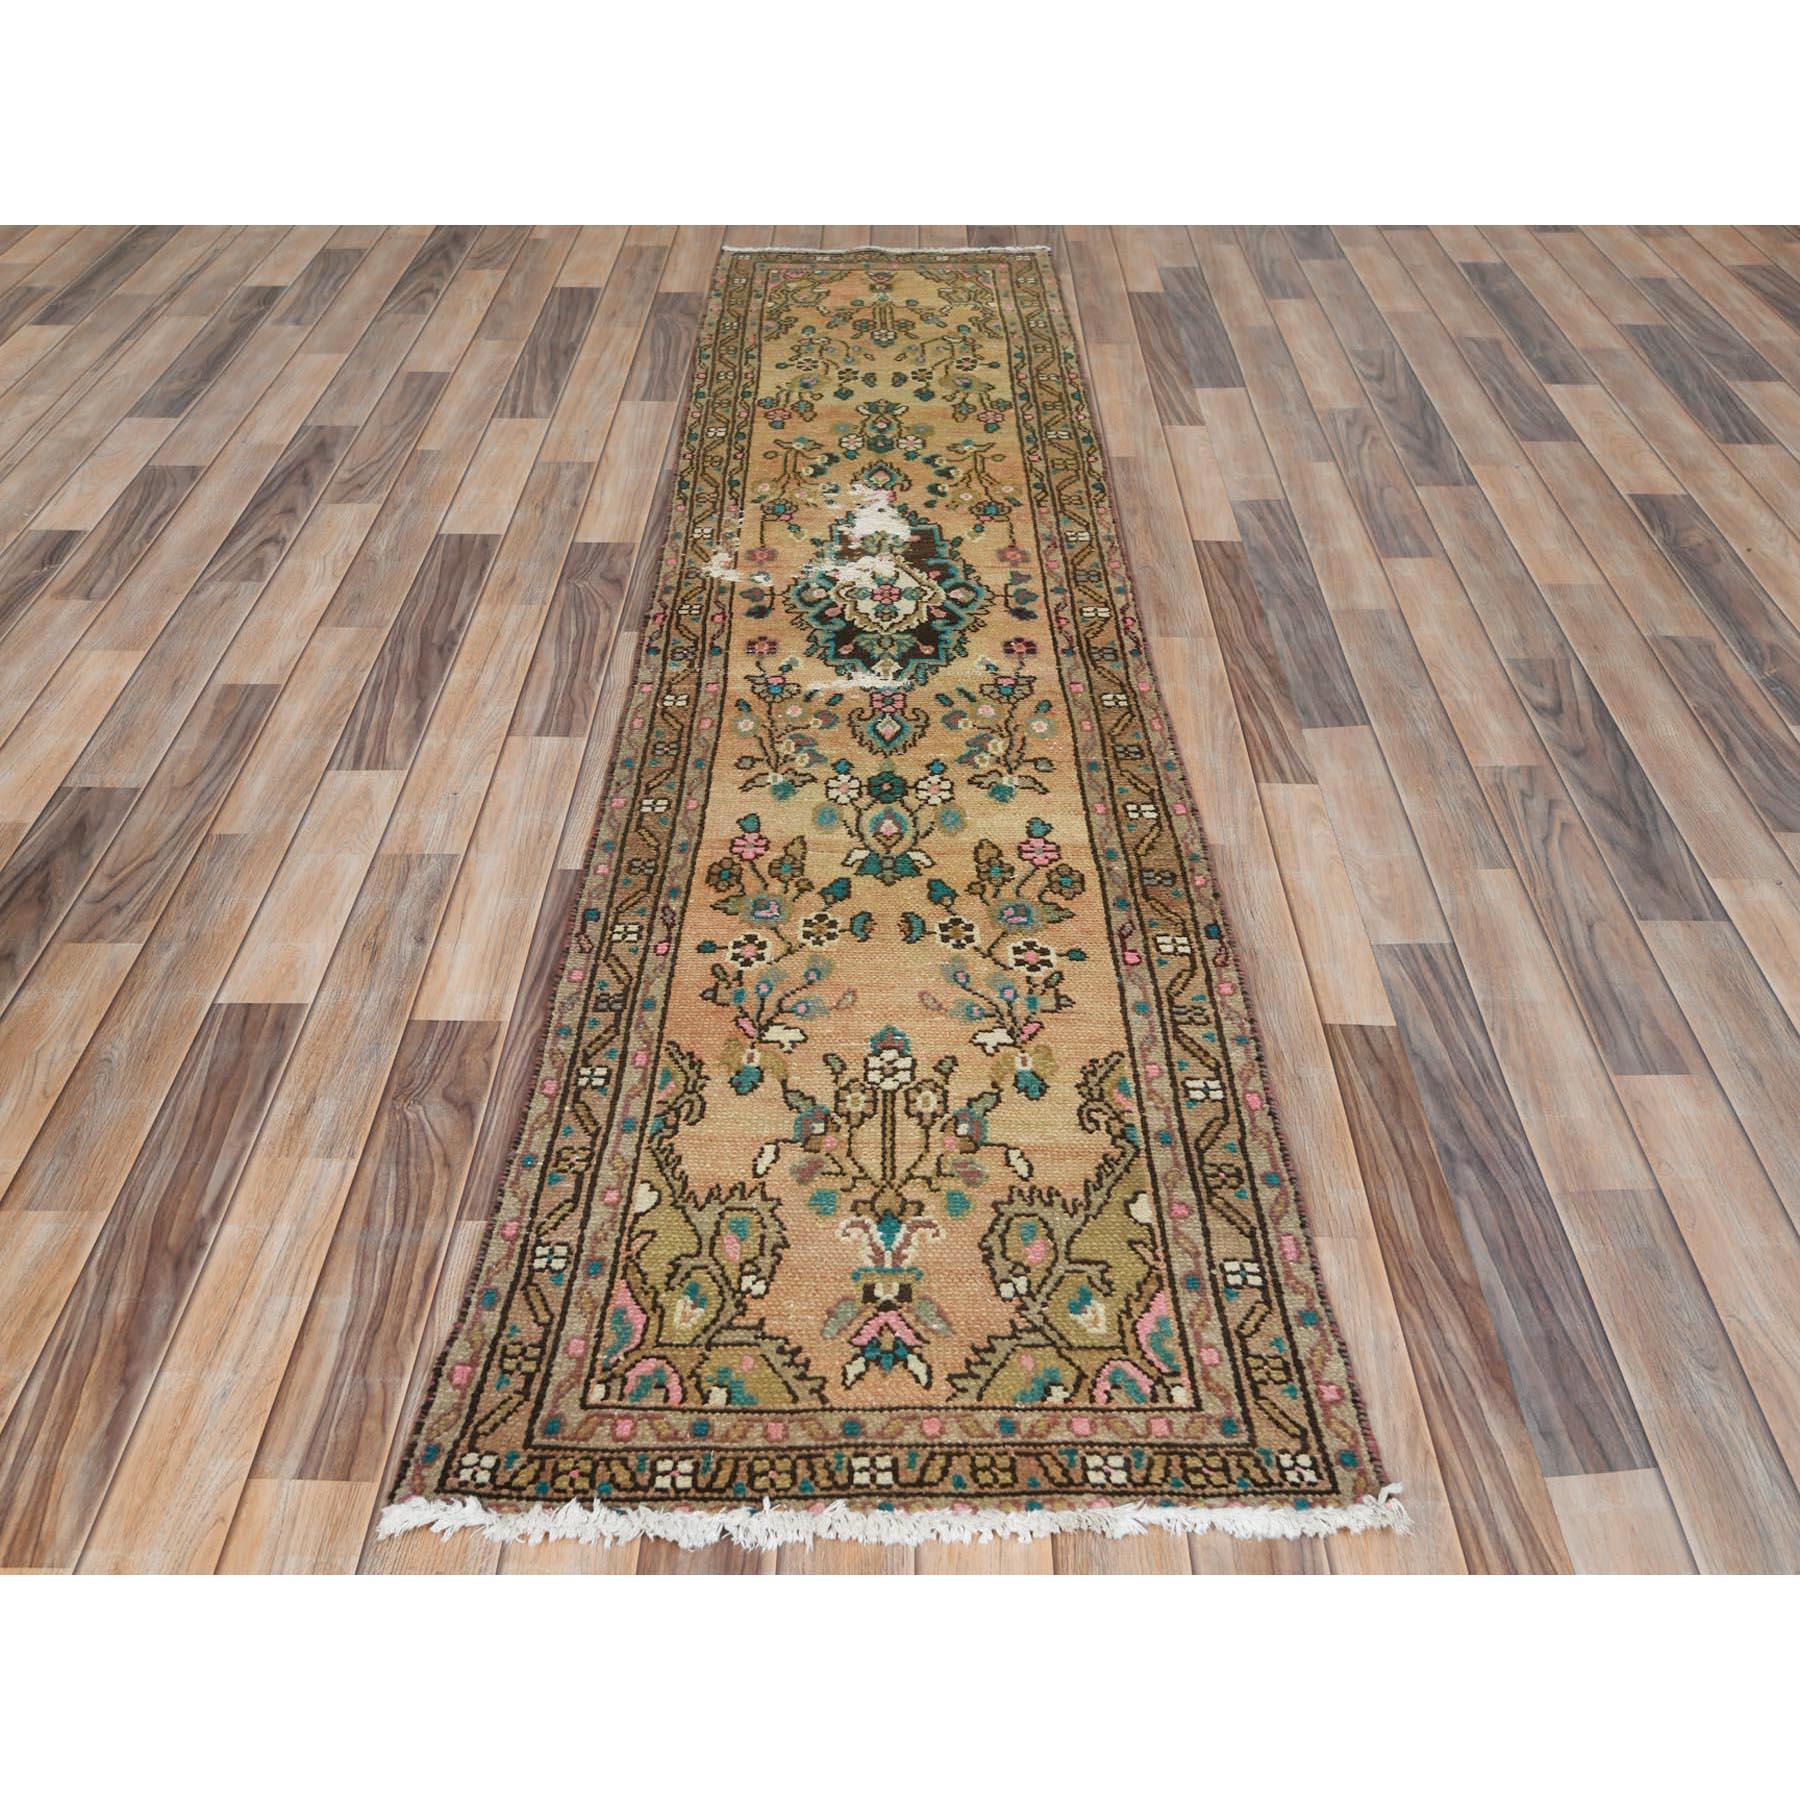 This fabulous Hand-Knotted carpet has been created and designed for extra strength and durability. This rug has been handcrafted for weeks in the traditional method that is used to make
Exact rug size in feet and inches : 2'1